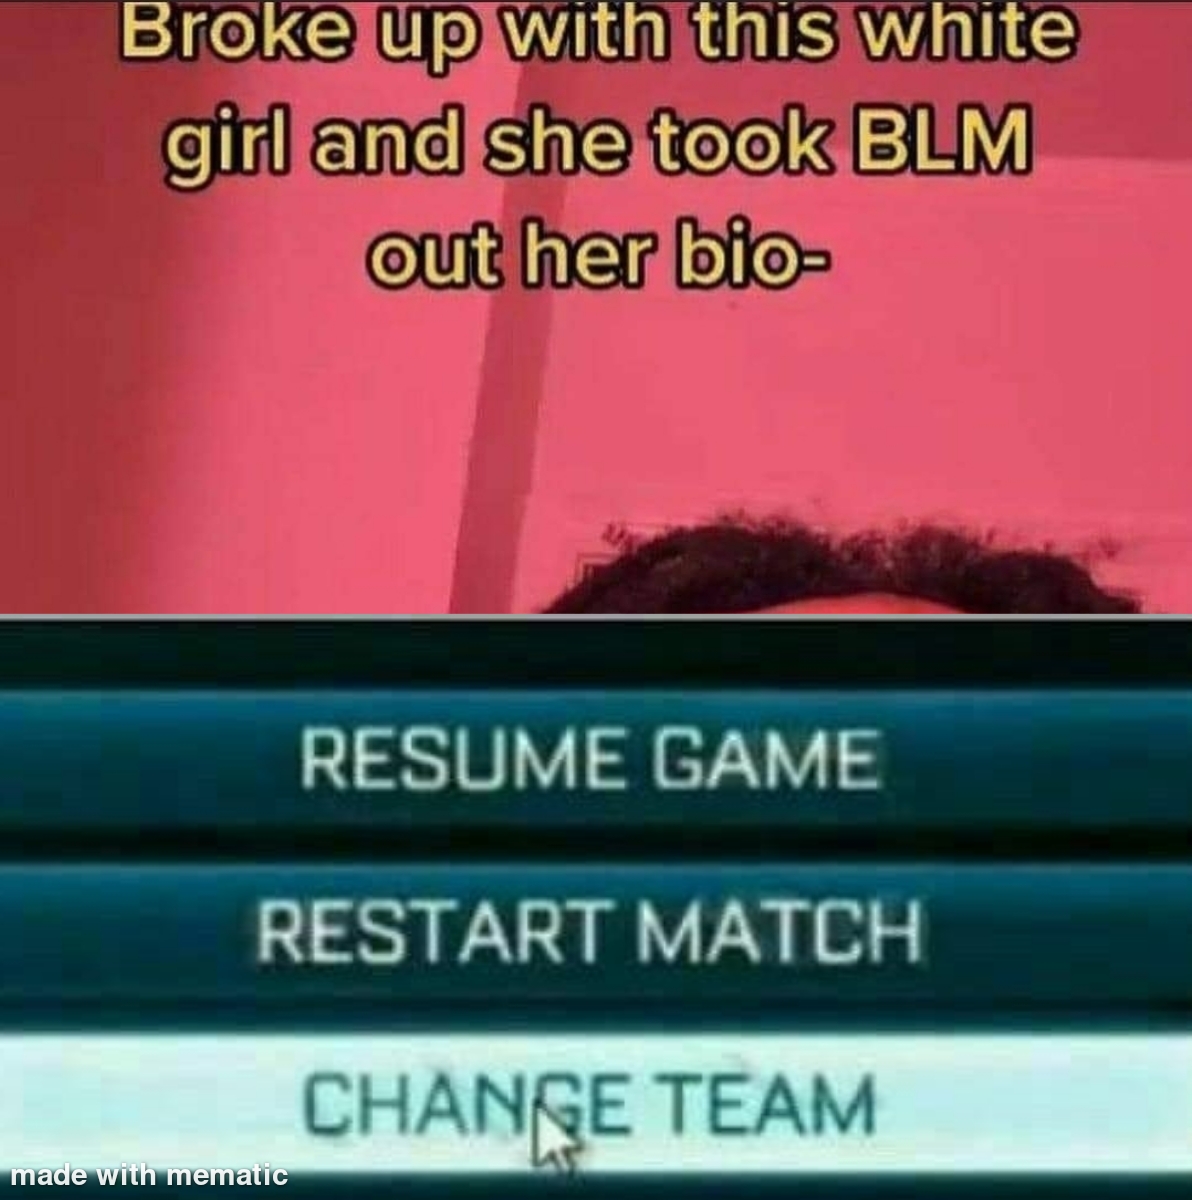 material - Broke up with this white girl and she took Blm out her bio Resume Game Restart Match Change Team made with mematic